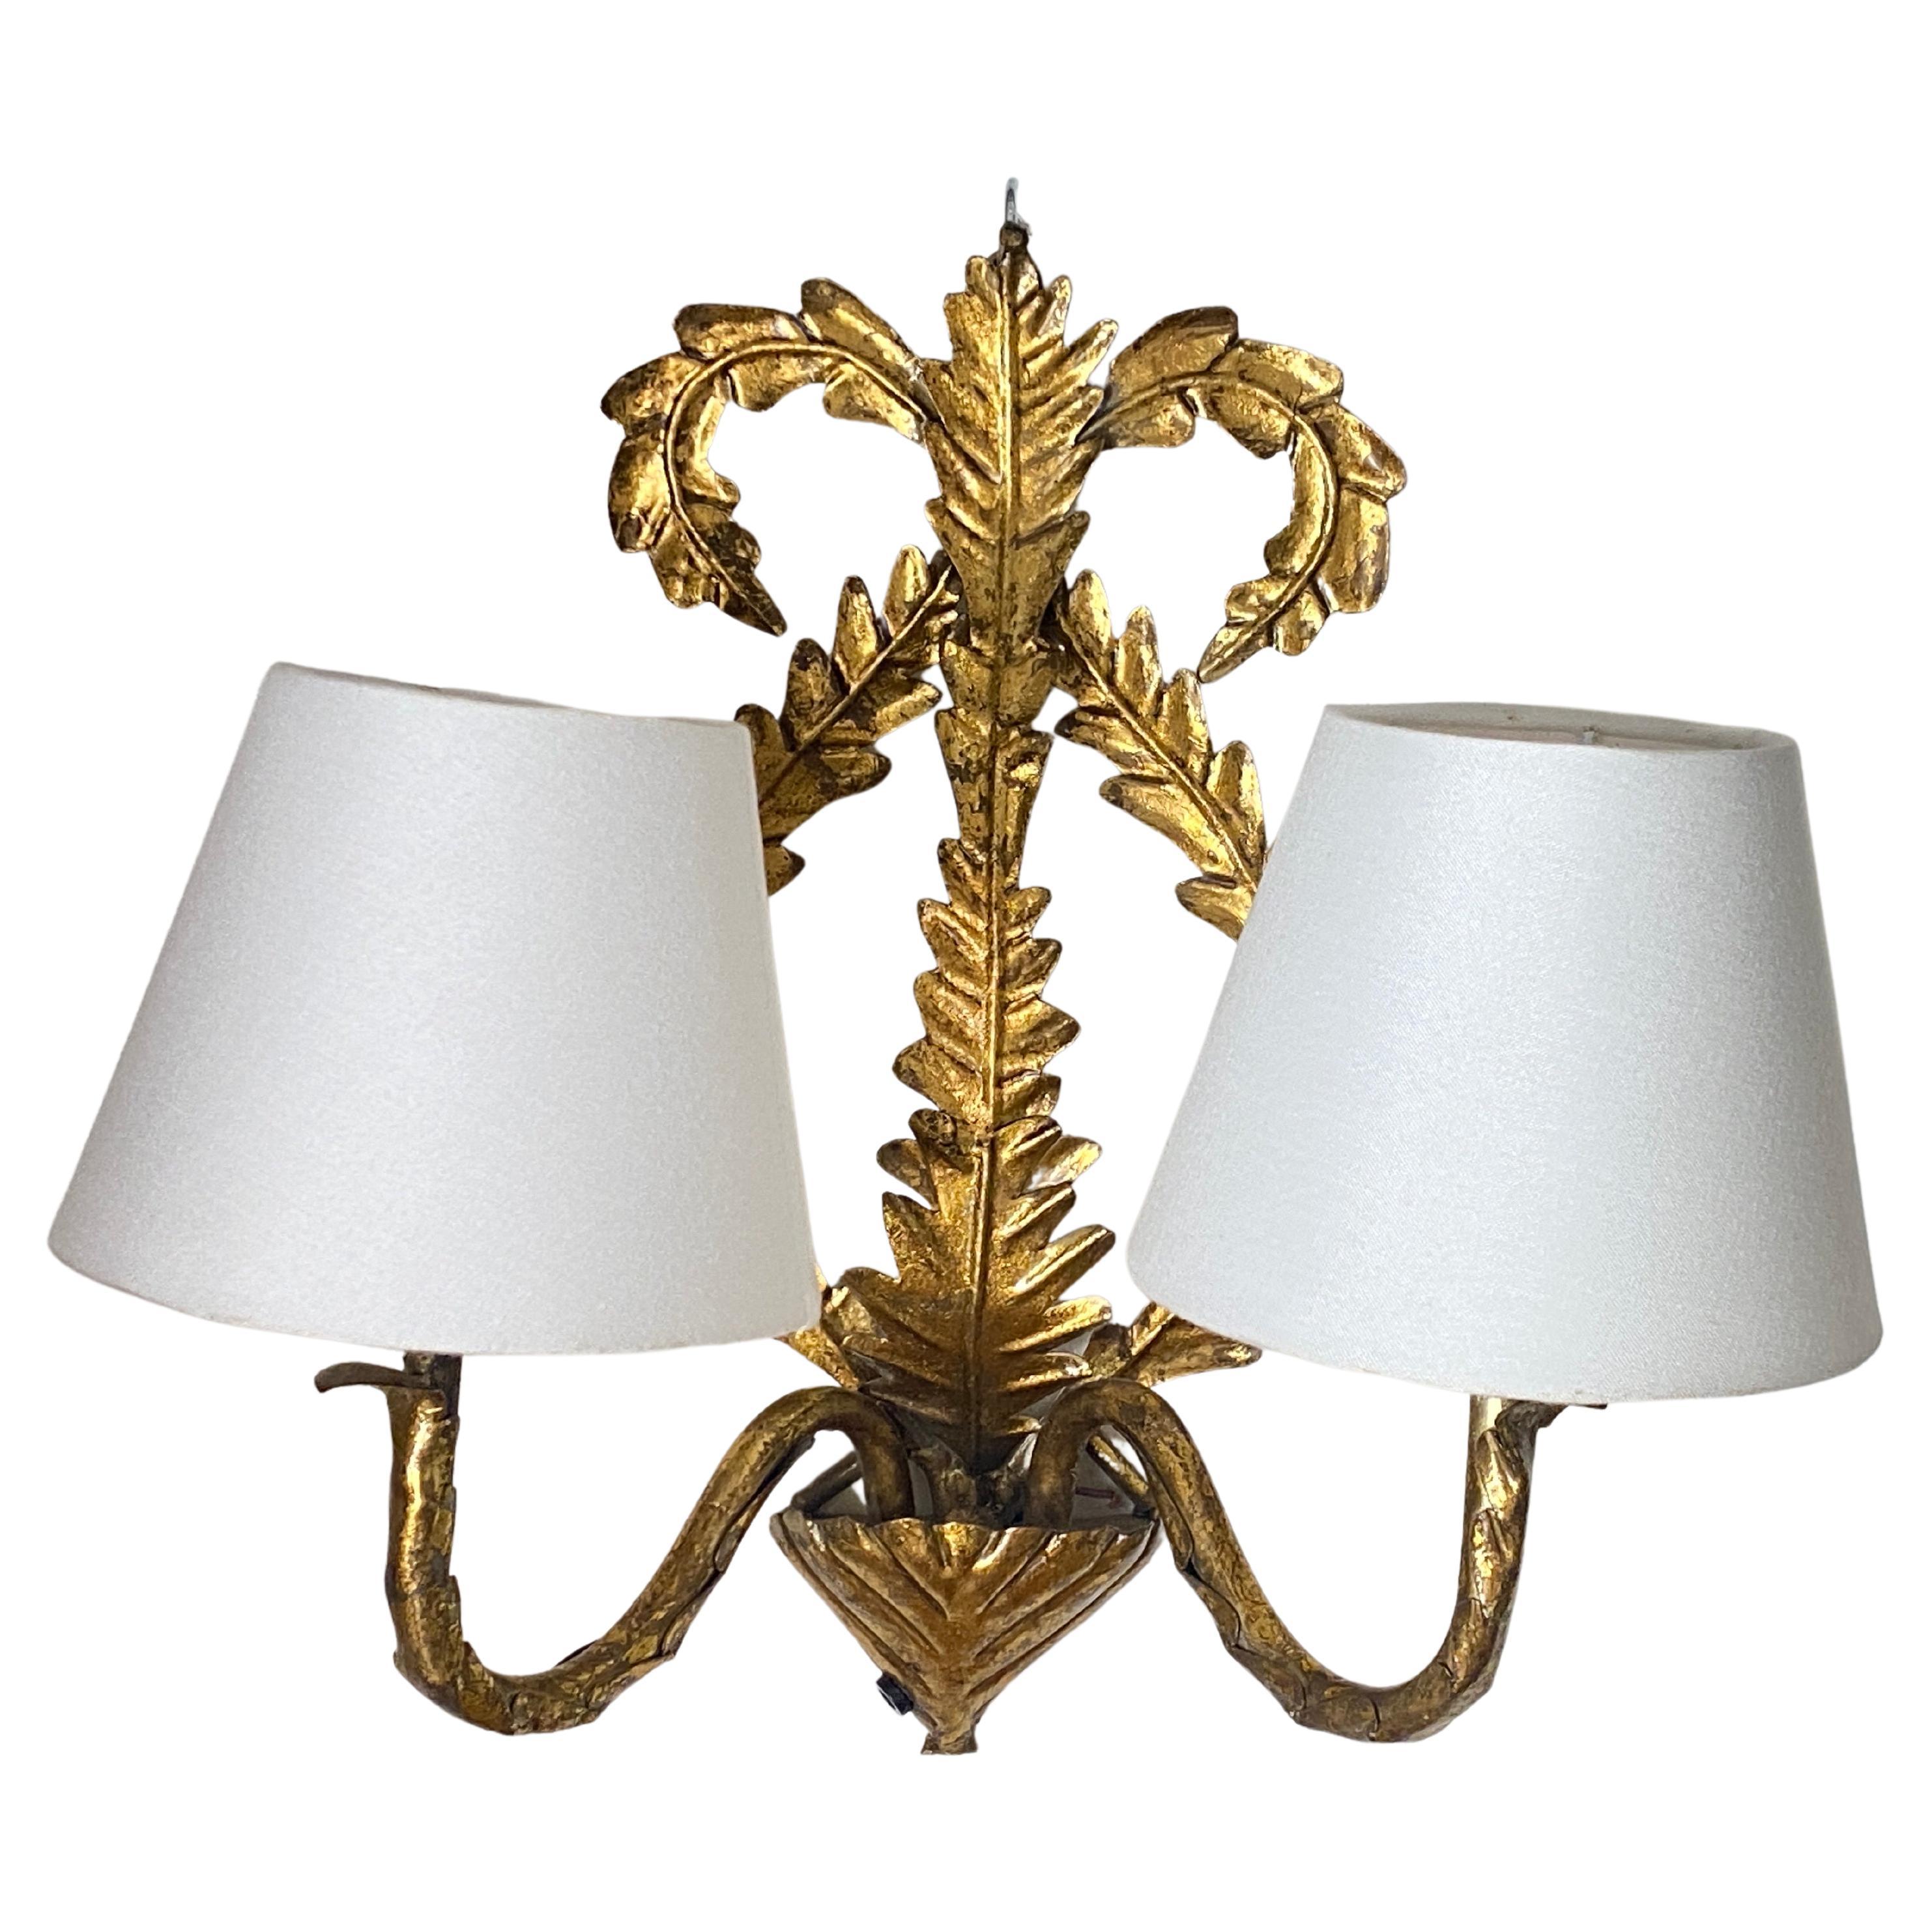 This pair of sconces, in gilt metal, remind the style of Coco chanel, that used a table with the same decor in her Parisian appartment. They are in the Hollywood Regency style. The condition is good, please see detailed pictures.
Italian